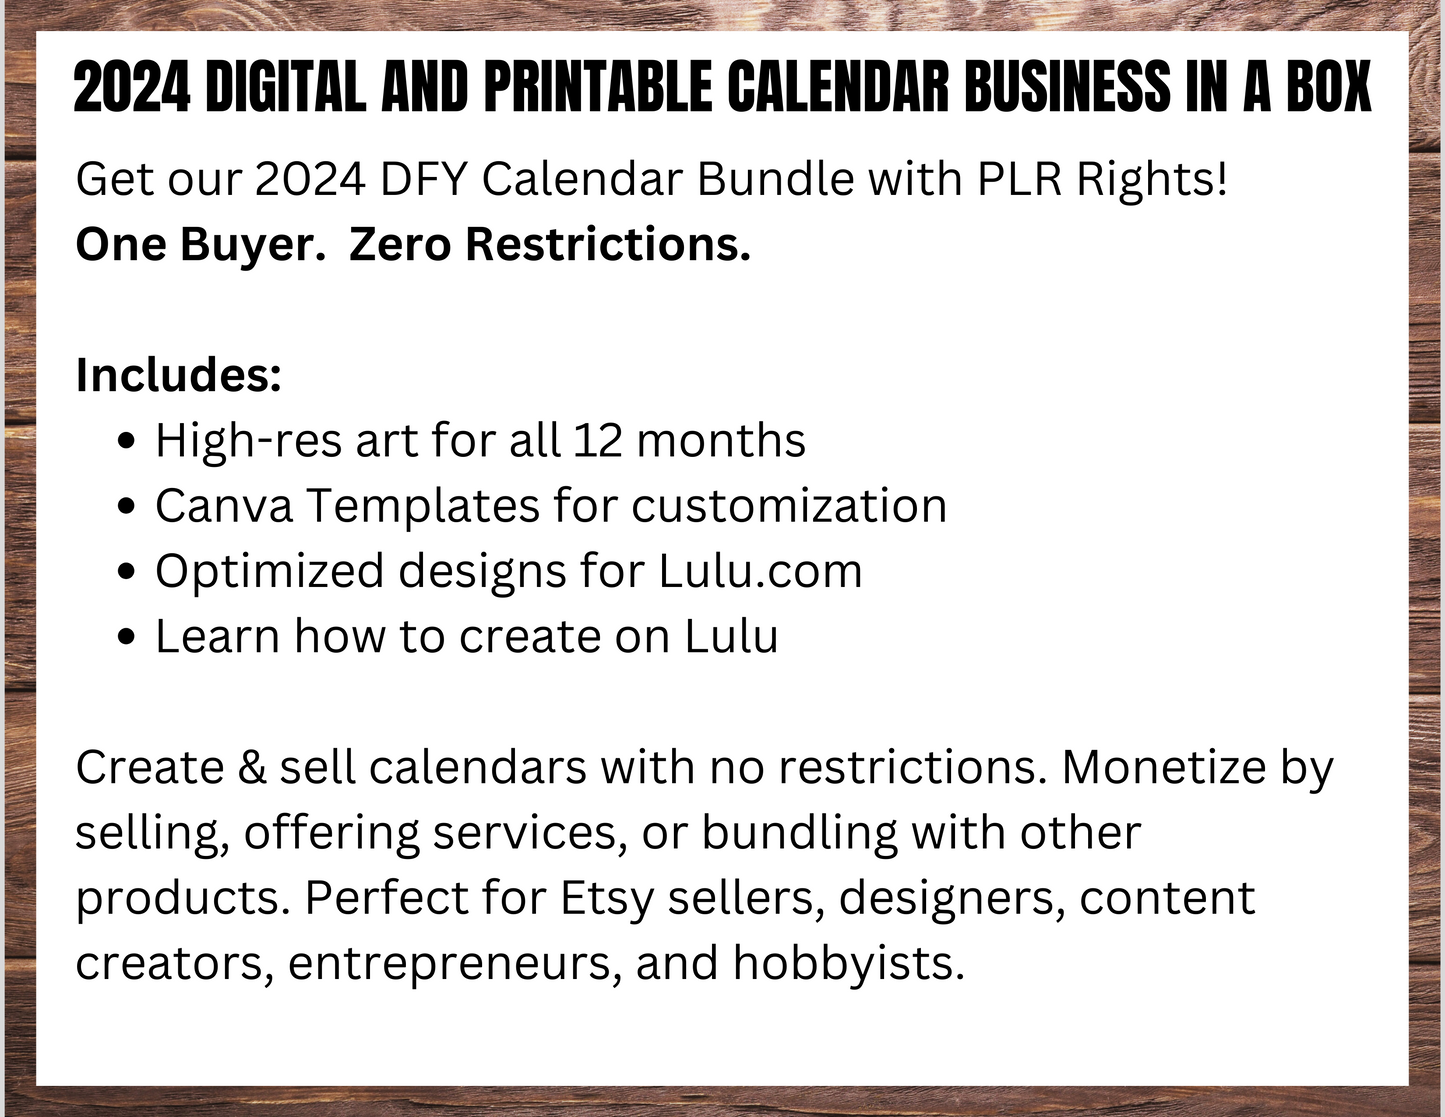 008-EB | Create & Sell Your Own 2024 Calendars | DFY Designs & Templates